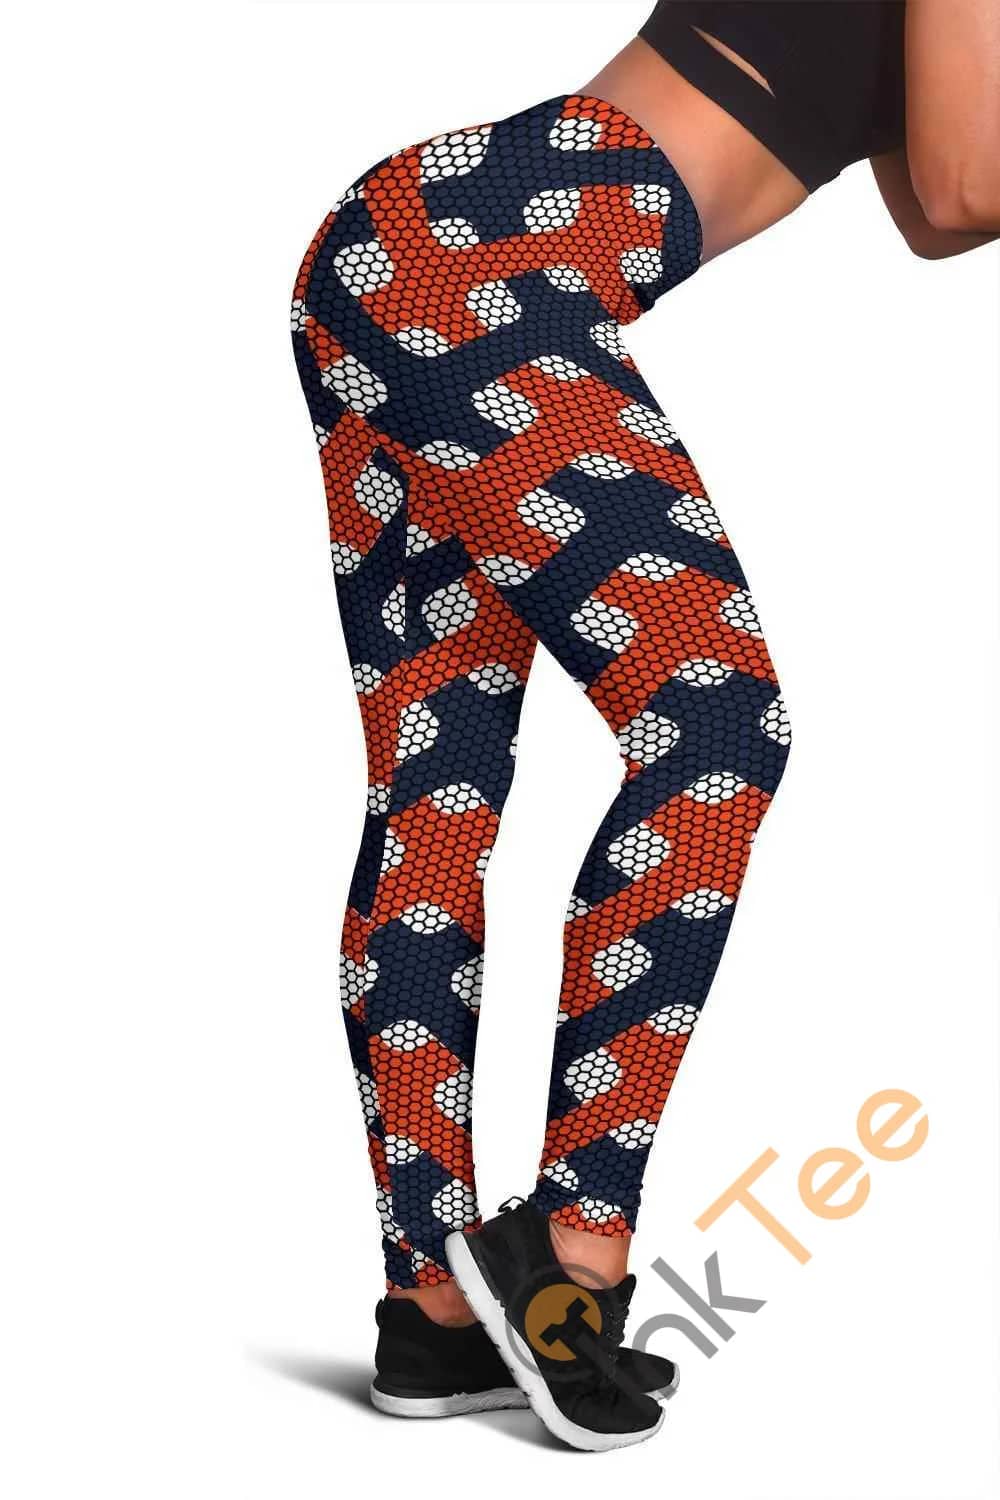 Virginia Cavaliers Inspired Liberty 3D All Over Print For Yoga Fitness Fashion Women'S Leggings